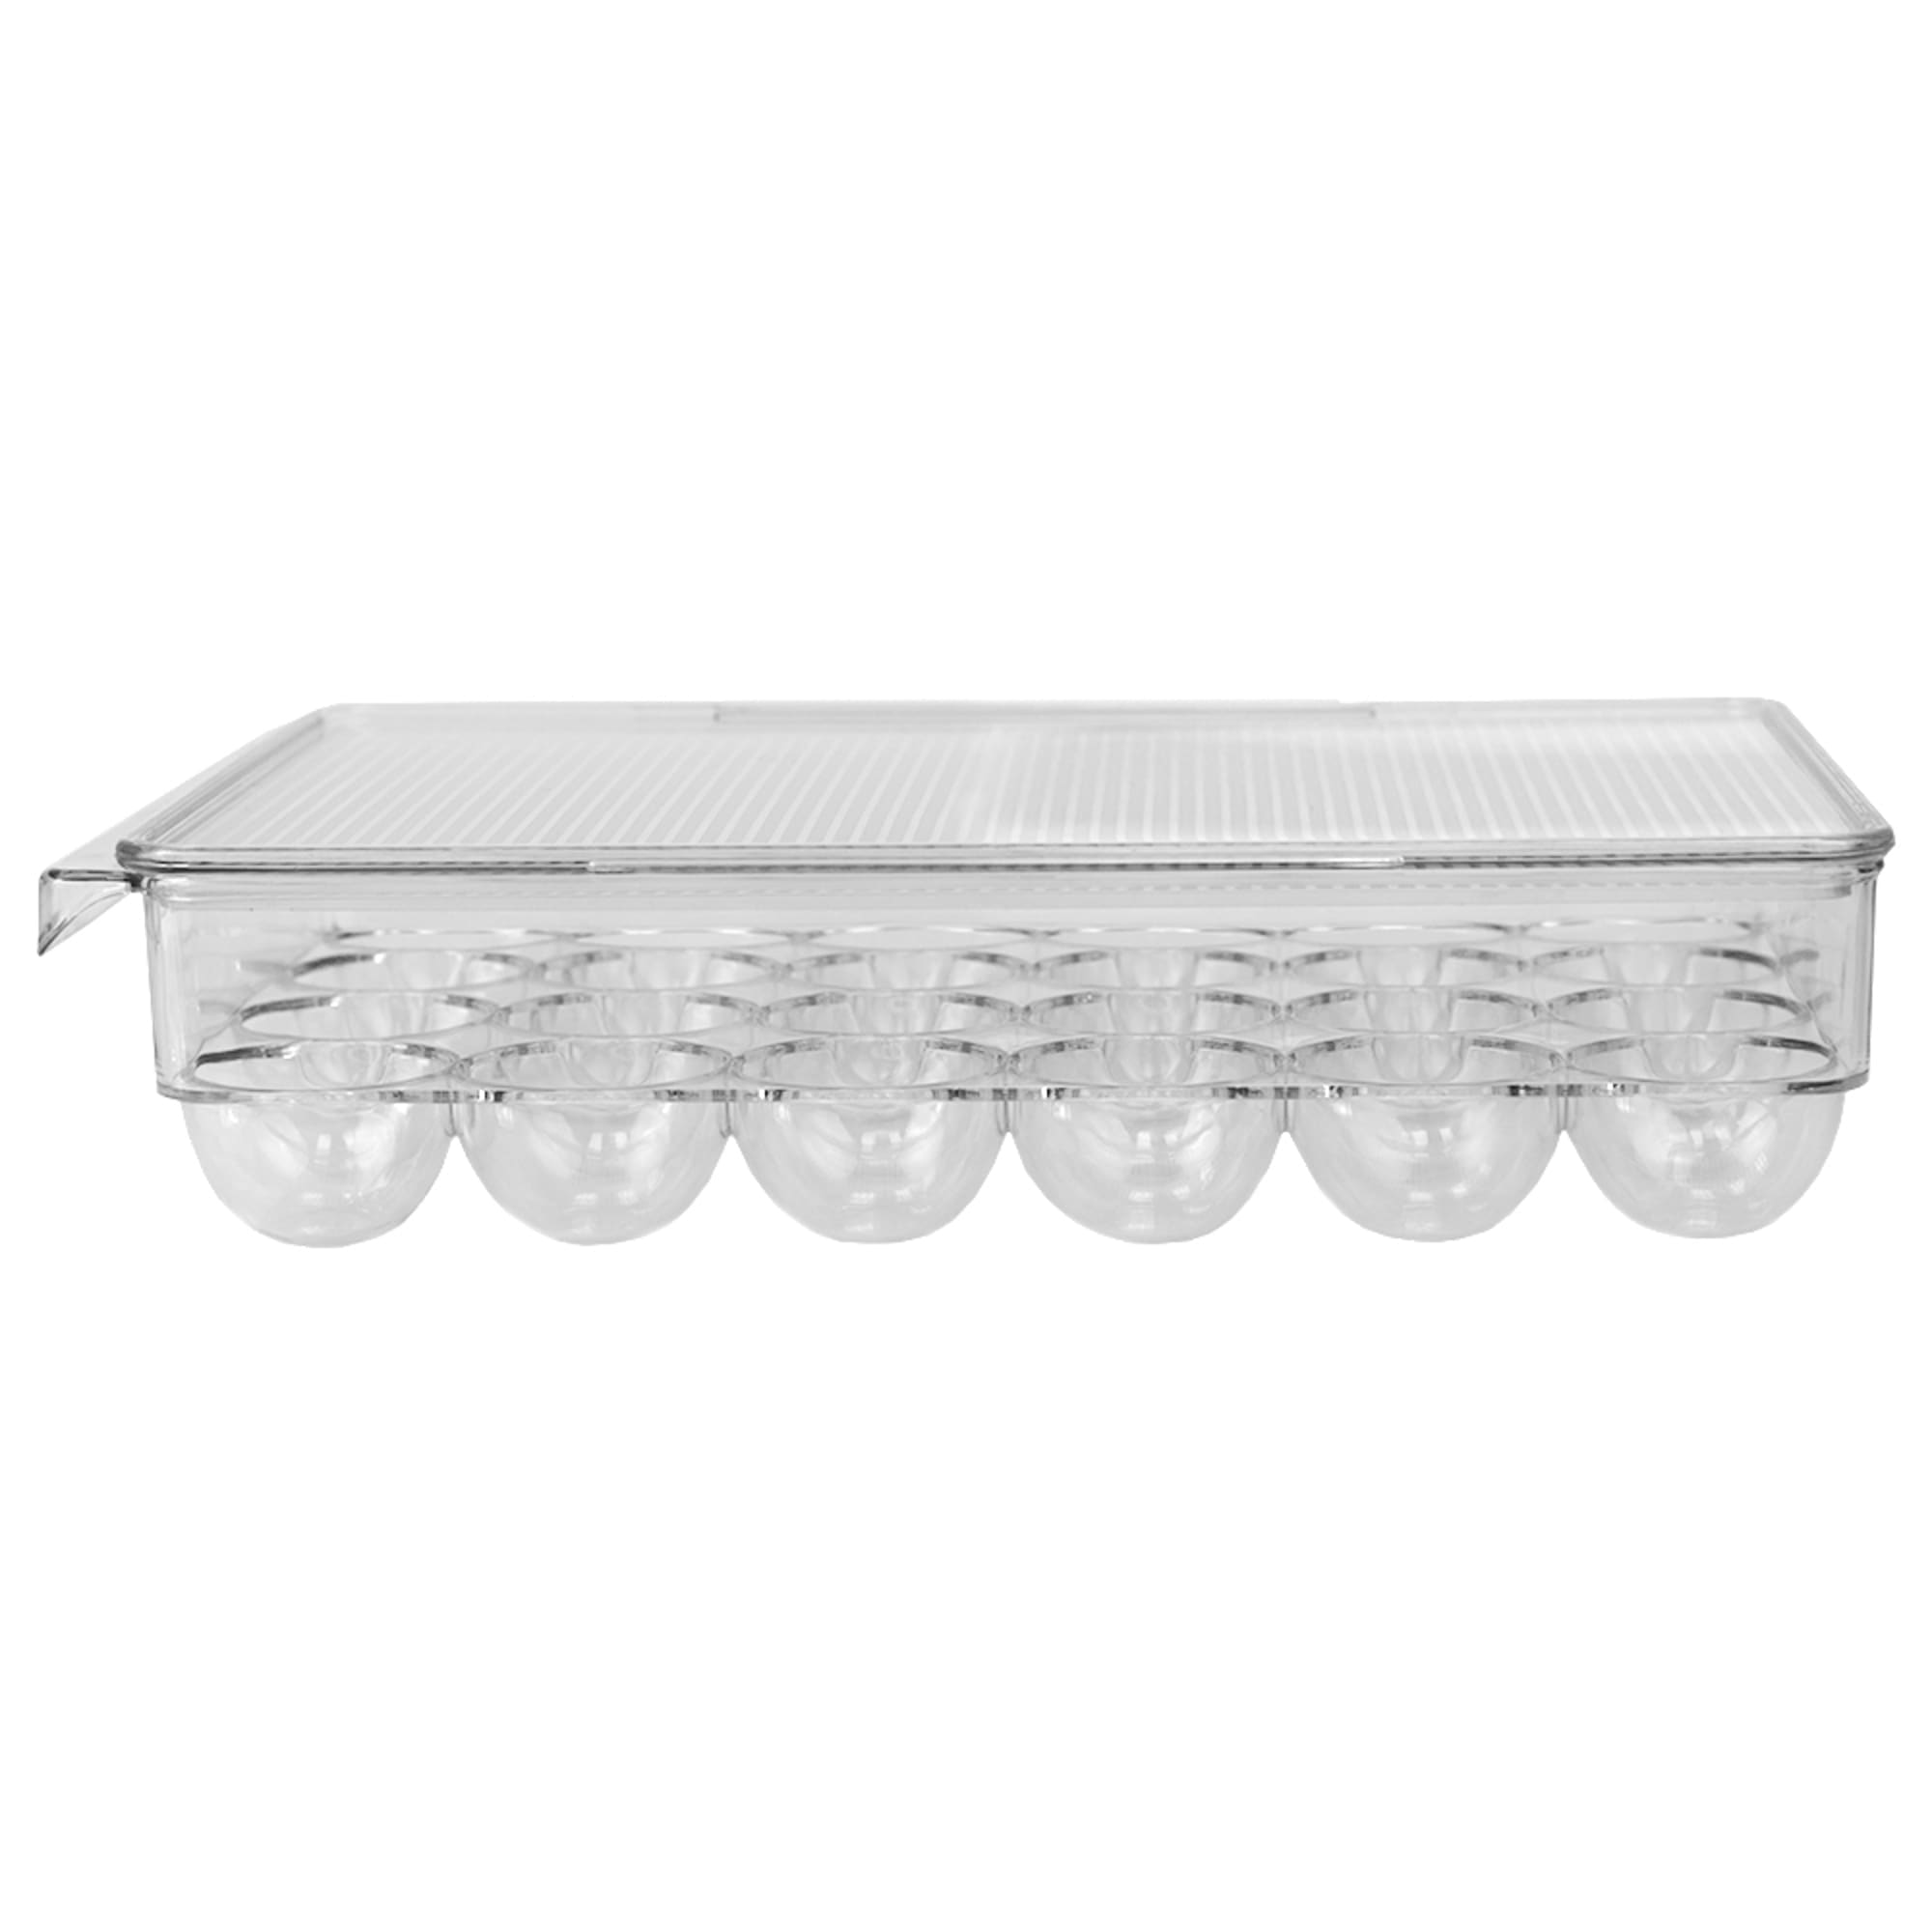 Home Basics Stackable 24 Compartment BPA Free Plastic  Extra Large Egg Holder Storage Tray with Lid, Clear $6.00 EACH, CASE PACK OF 12